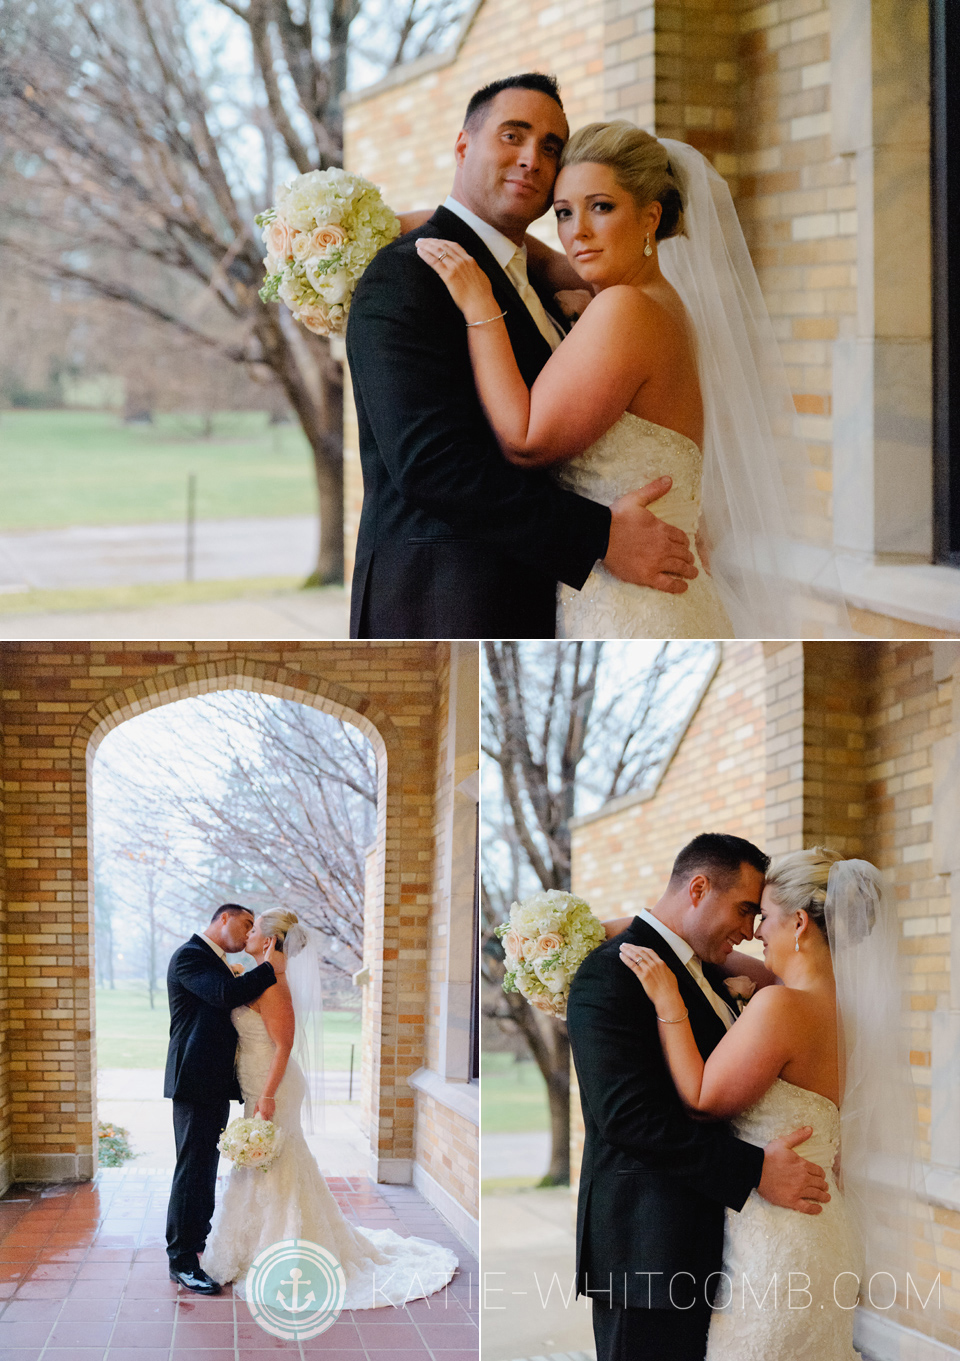 Intimate Portraits of the Bride & Groom during their winter wedding in South Bend, IN